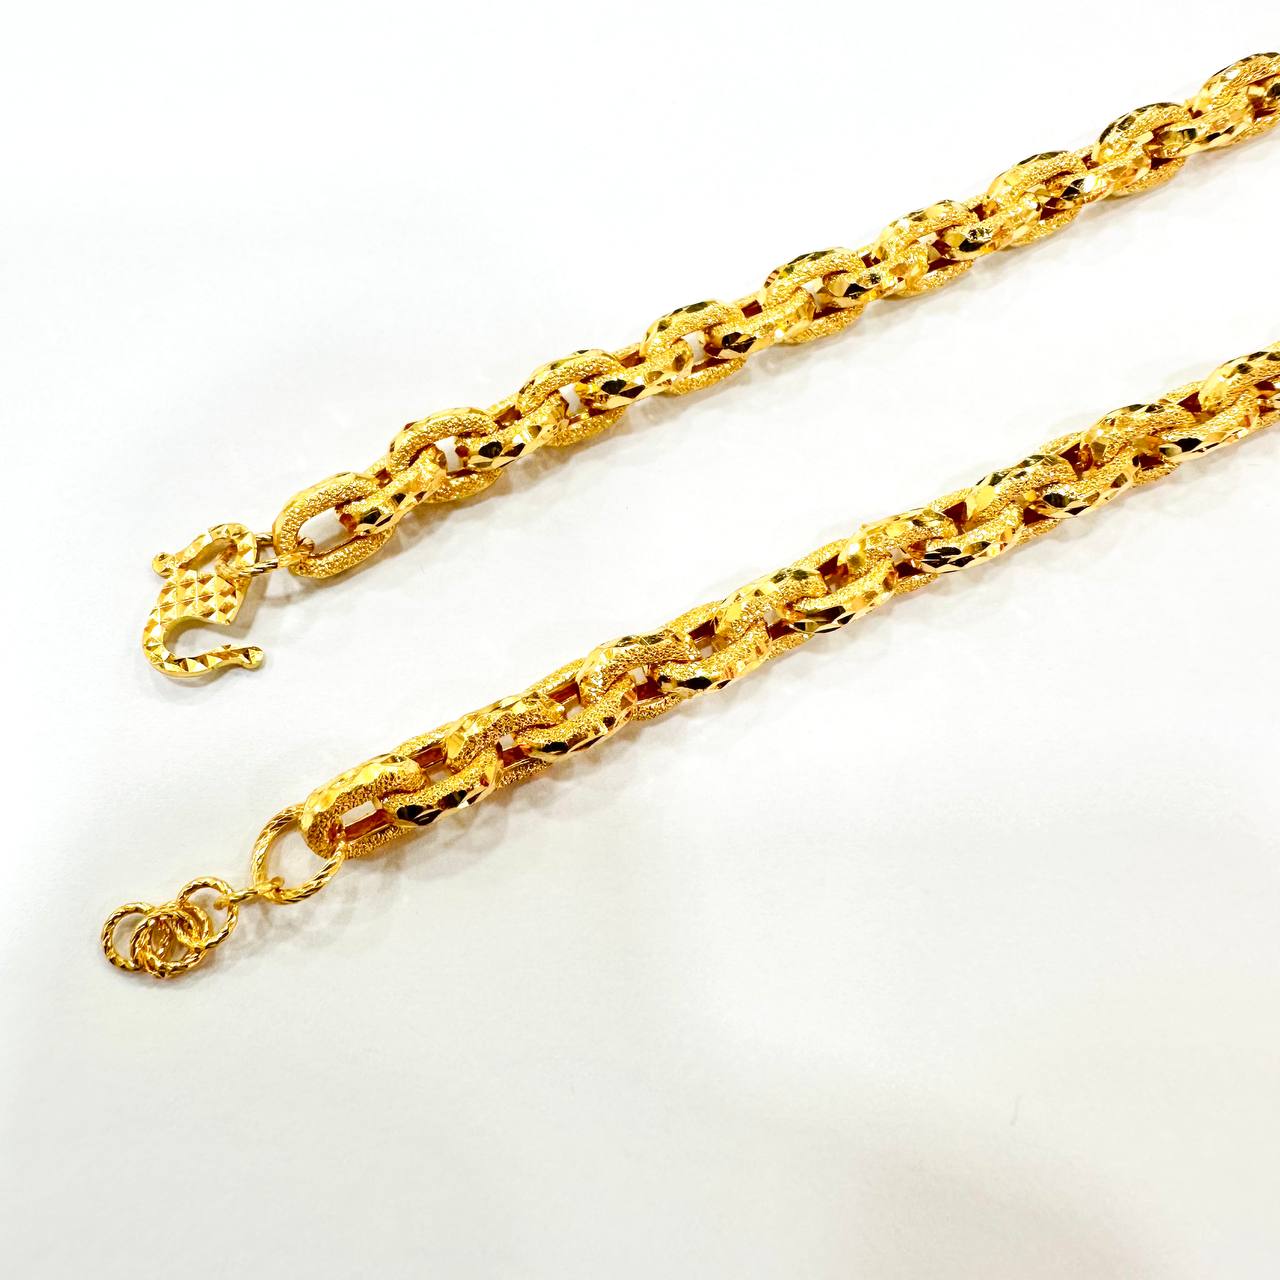 22k / 916 Gold Anchor Necklace with Cutting V2-916 gold-Best Gold Shop